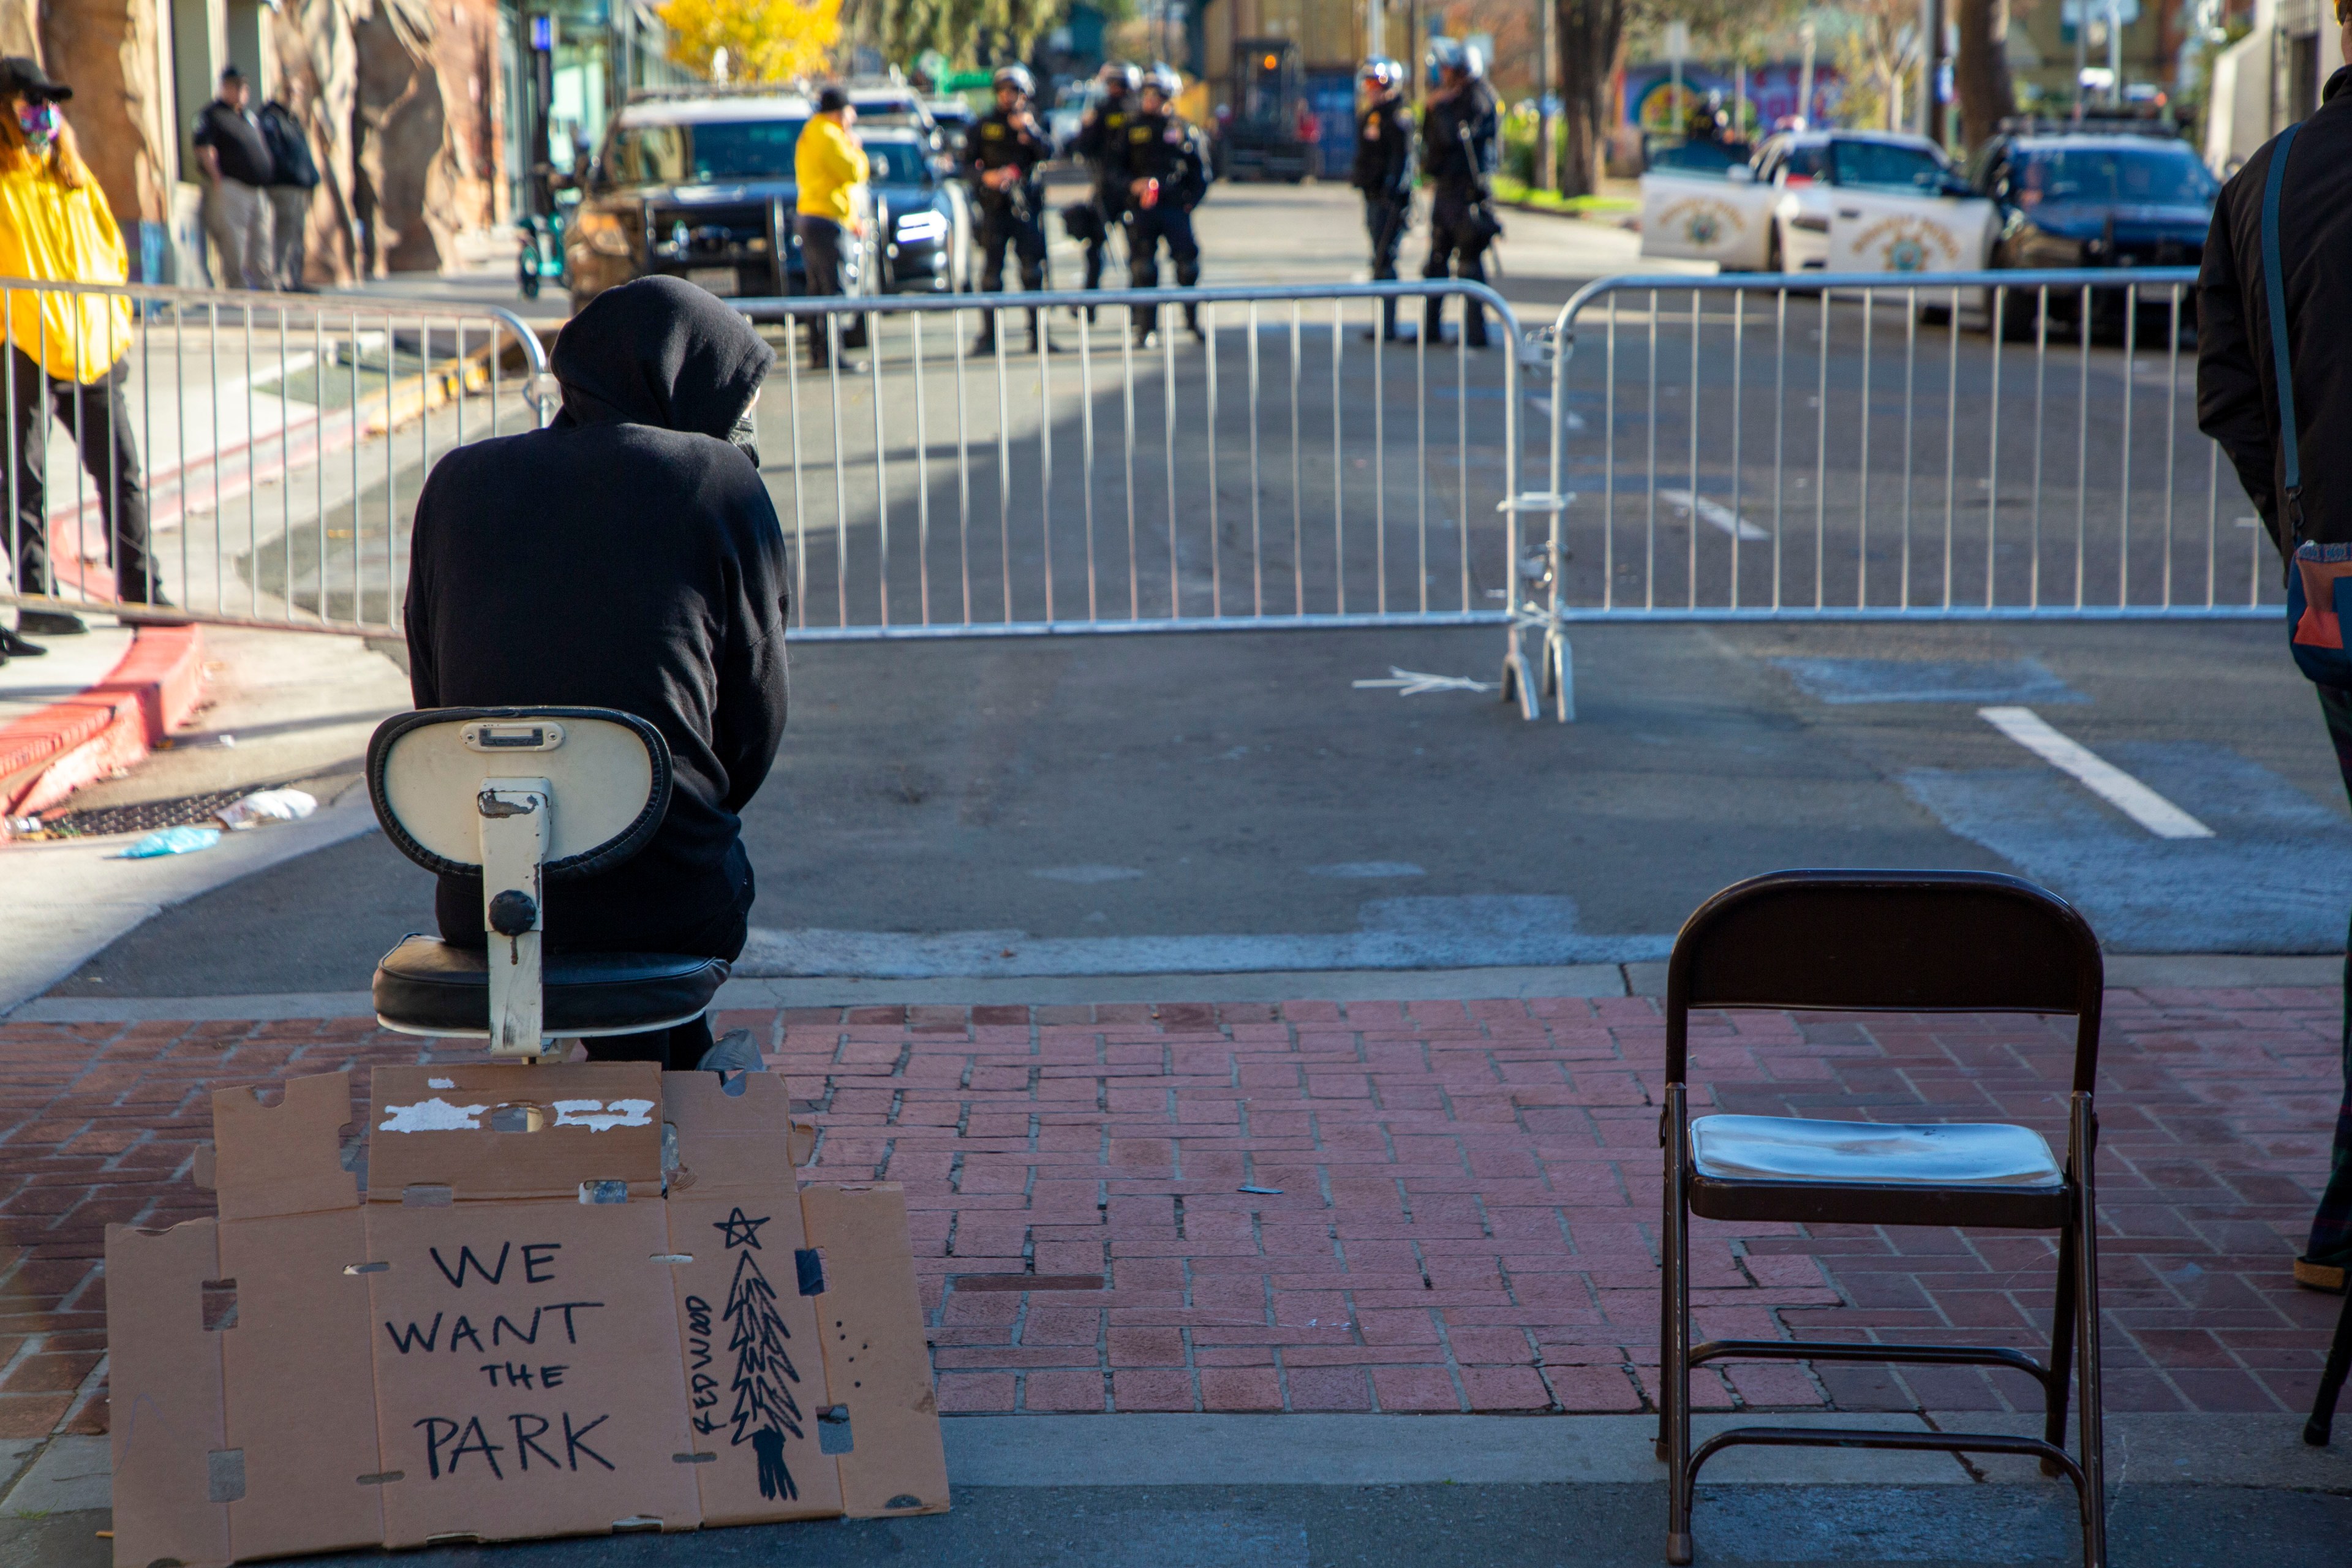 A person wearing a dark hooded sweatshirt sits in a chair in front of police on the other side of a metal barricade; behind the person, a cardboard sign reads &quot;we want the park.&quot;